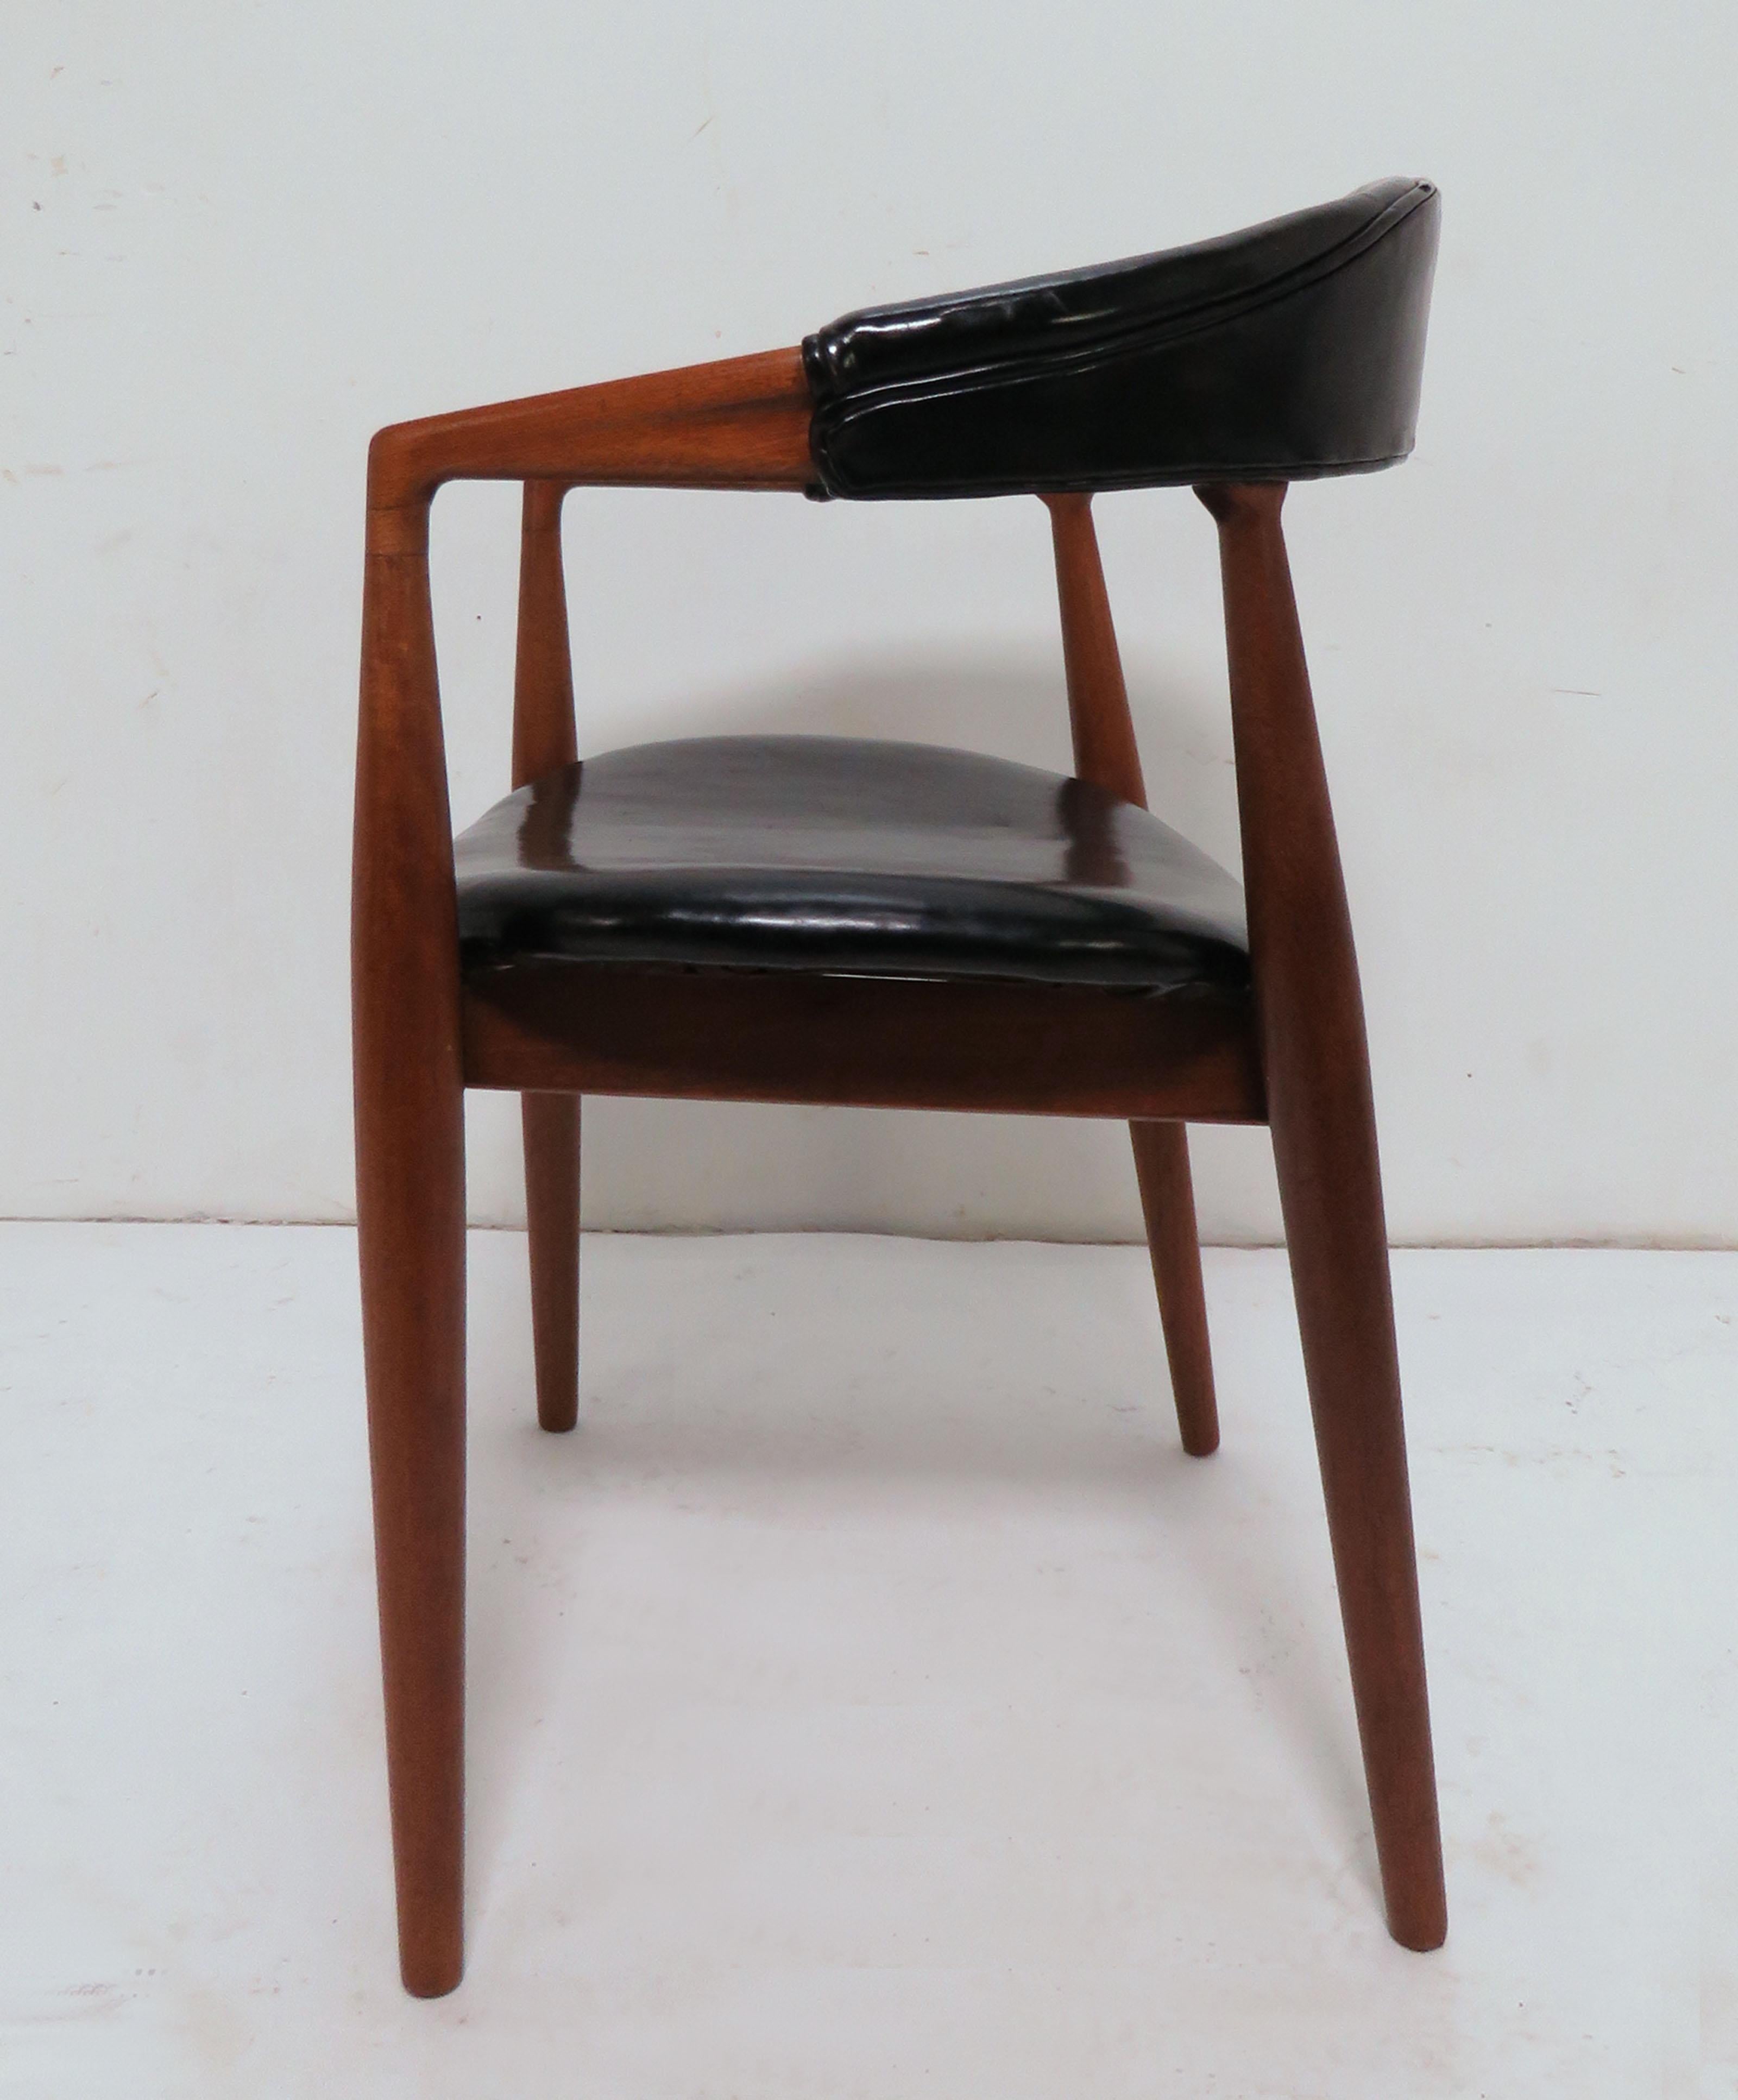 Teak armchair with original leather upholstery designed by Kai Kristiansen in 1958 for Feldballes Mobelfabrik, Model No. 61. Made in Denmark, imported to the United States by George Tanier, Inc.